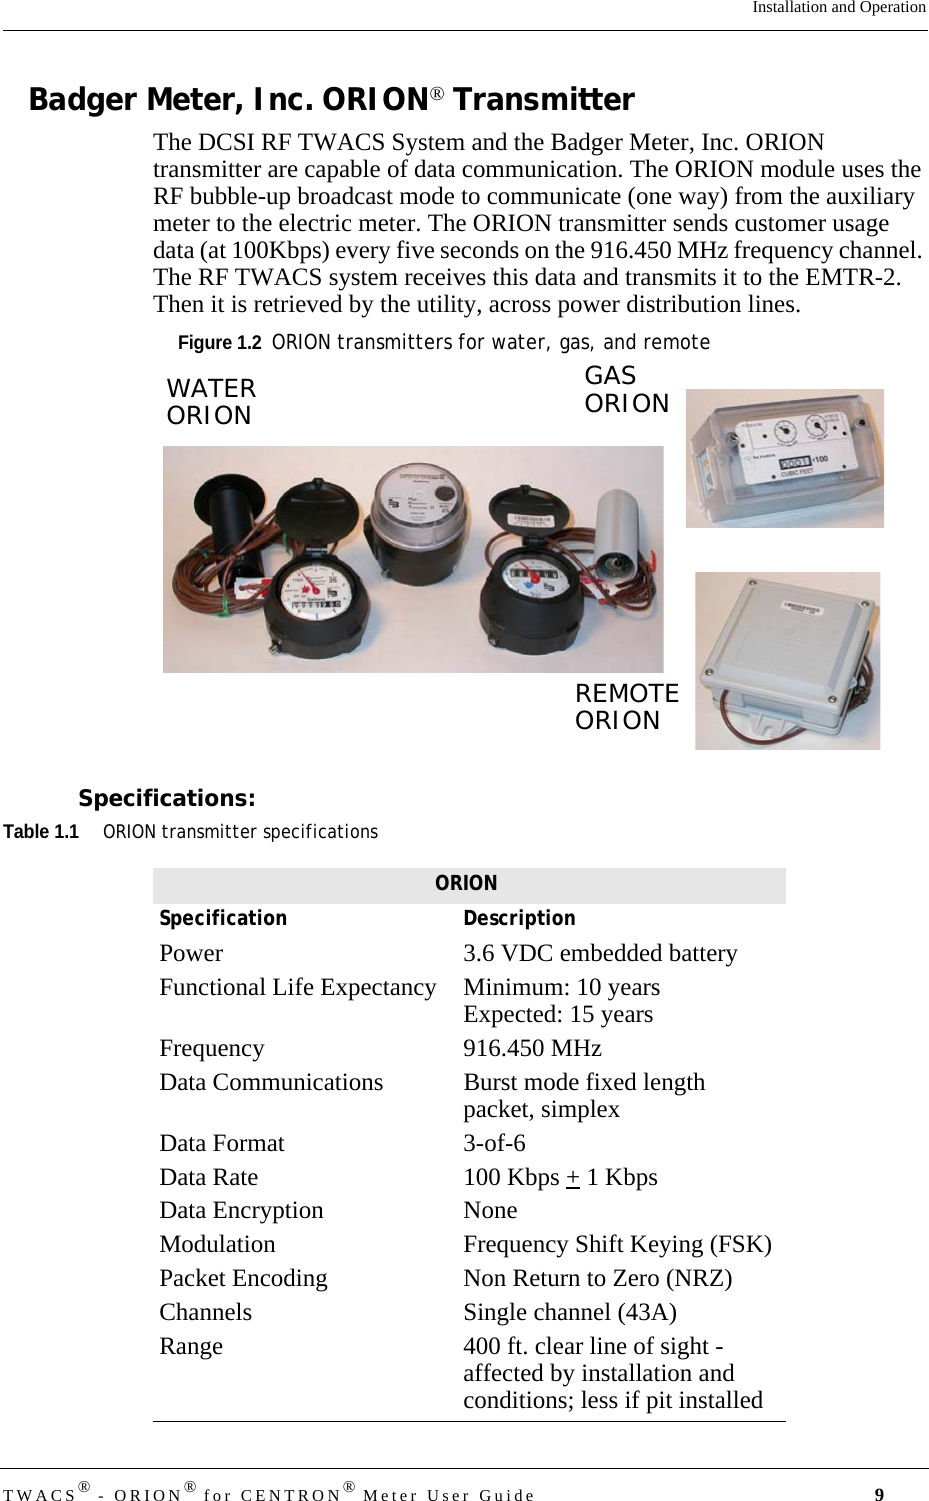 DRAFTTWACS® - ORION® for CENTRON® Meter User Guide 9Installation and OperationBadger Meter, Inc. ORION® TransmitterThe DCSI RF TWACS System and the Badger Meter, Inc. ORION transmitter are capable of data communication. The ORION module uses the RF bubble-up broadcast mode to communicate (one way) from the auxiliary meter to the electric meter. The ORION transmitter sends customer usage data (at 100Kbps) every five seconds on the 916.450 MHz frequency channel. The RF TWACS system receives this data and transmits it to the EMTR-2. Then it is retrieved by the utility, across power distribution lines.Figure 1.2  ORION transmitters for water, gas, and remoteSpecifications:Table 1.1ORION transmitter specificationsREMOTEORIONGASORIONWATERORIONORIONSpecification DescriptionPower 3.6 VDC embedded batteryFunctional Life Expectancy  Minimum: 10 yearsExpected: 15 yearsFrequency 916.450 MHzData Communications  Burst mode fixed length packet, simplexData Format  3-of-6Data Rate  100 Kbps + 1 KbpsData Encryption  NoneModulation  Frequency Shift Keying (FSK)Packet Encoding  Non Return to Zero (NRZ)Channels  Single channel (43A)Range  400 ft. clear line of sight - affected by installation and conditions; less if pit installed